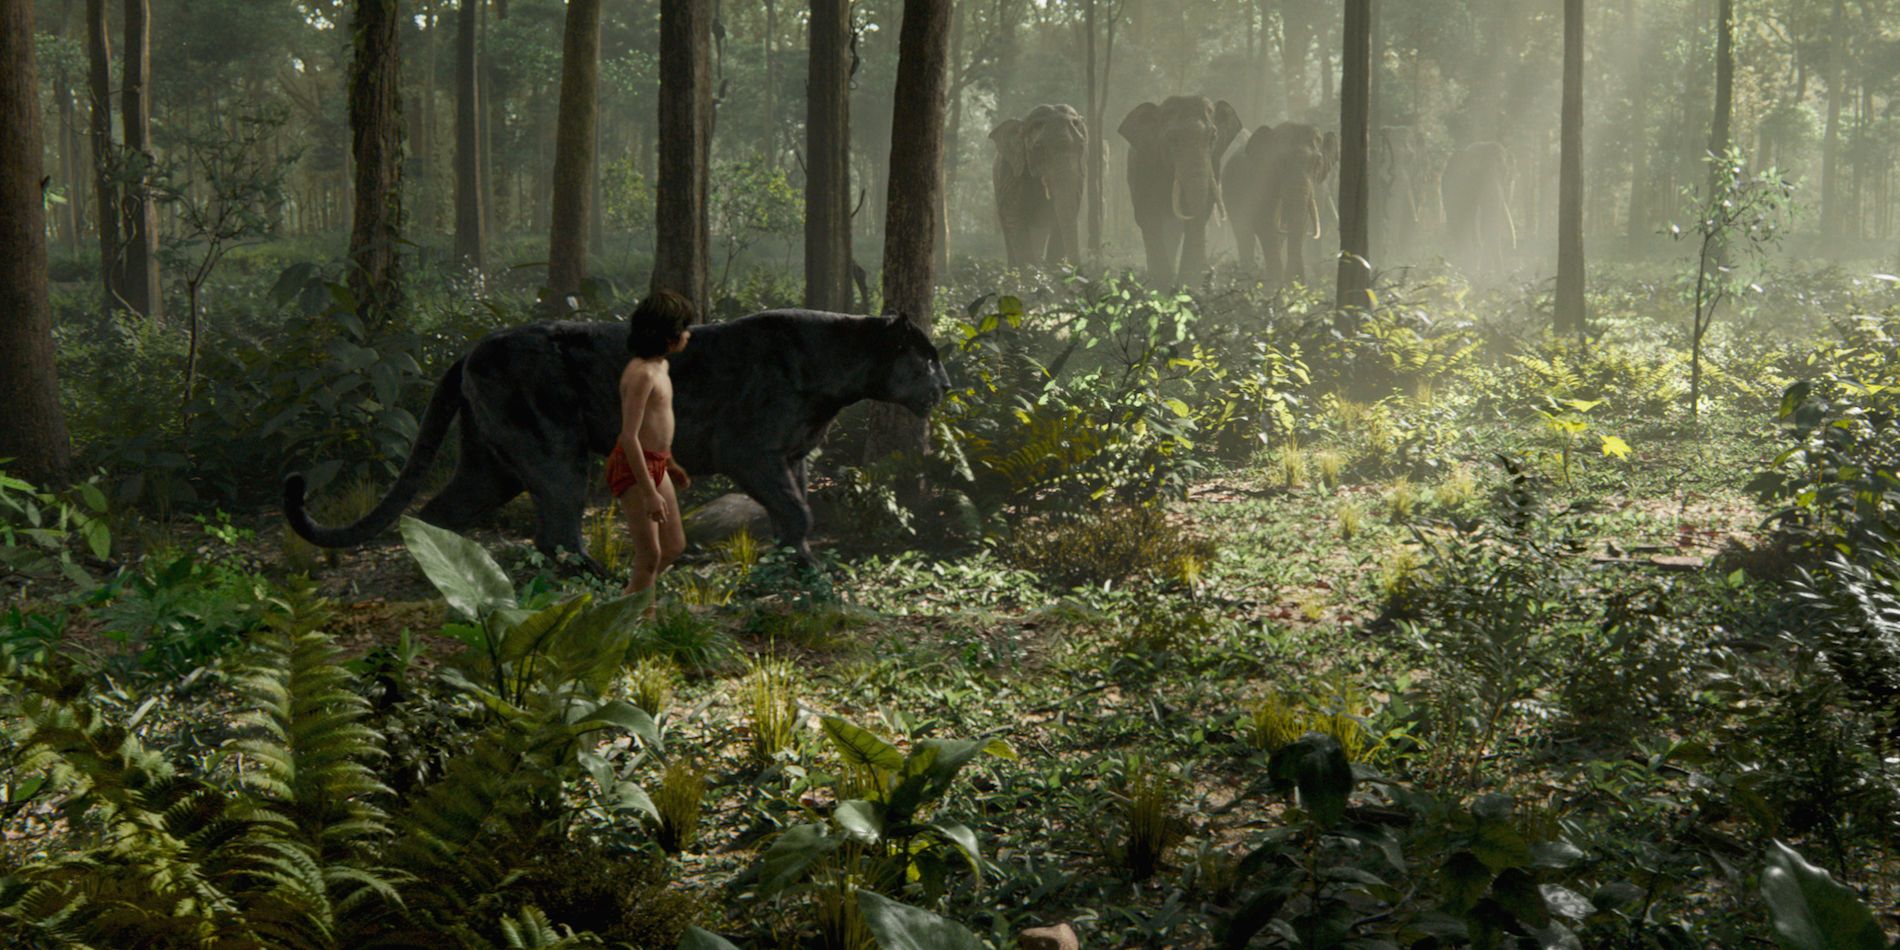 Ben Kingsley voices Bagheera in The Jungle Book